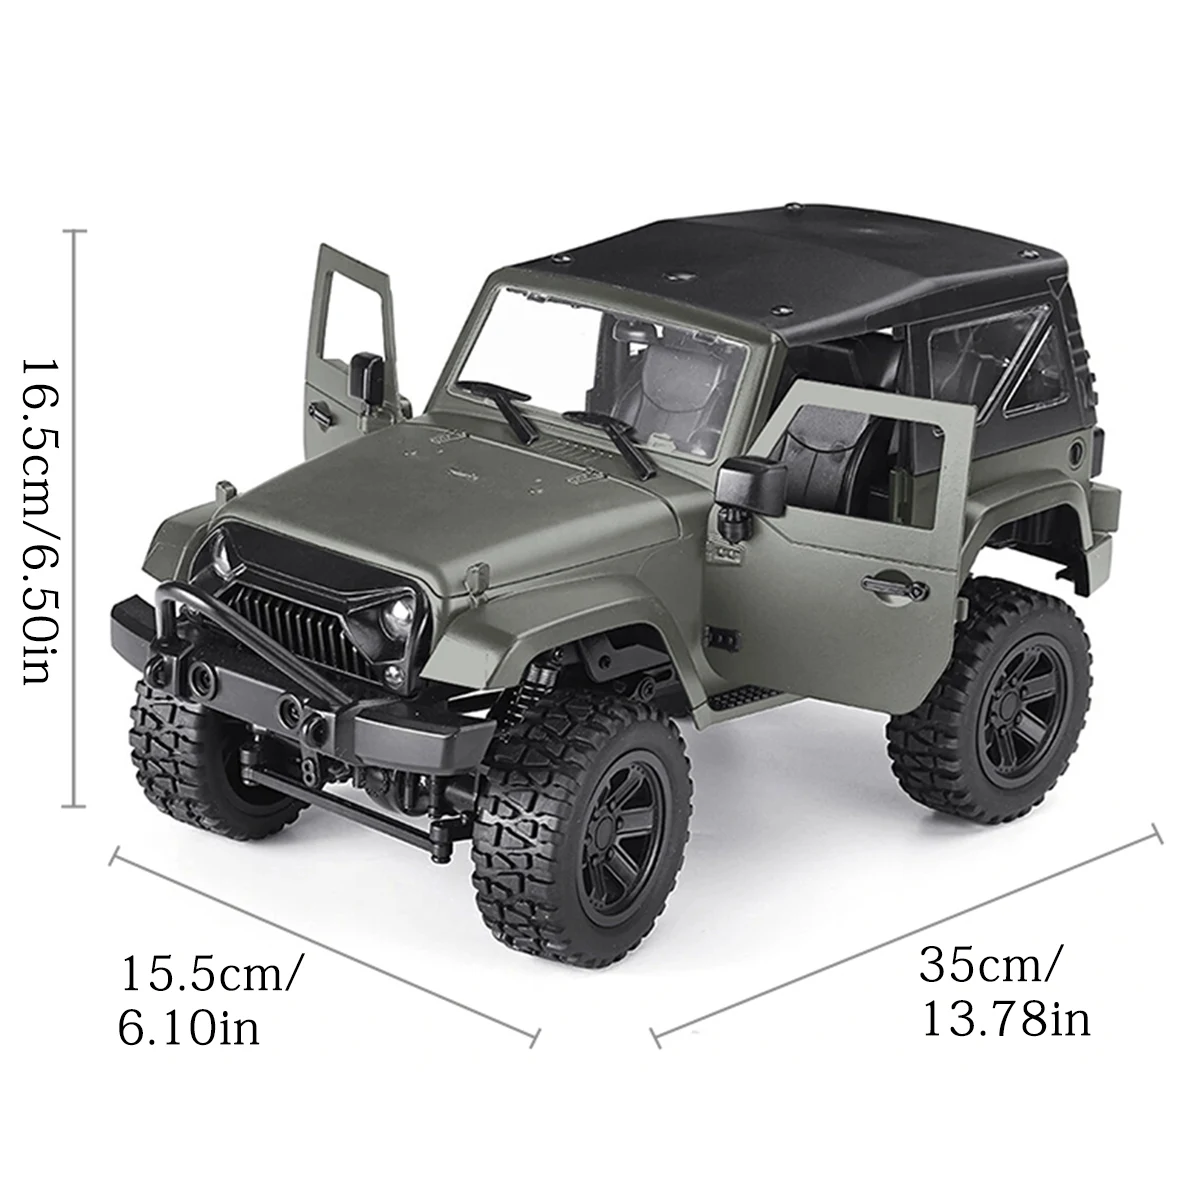 1/14 Remote Control Cars Toy 2.4GHz RC Jeep W/ LED Light 4-driving Force Off-Road Vehicle RC Car 500mAh Chargeable for Kids Gift enlarge